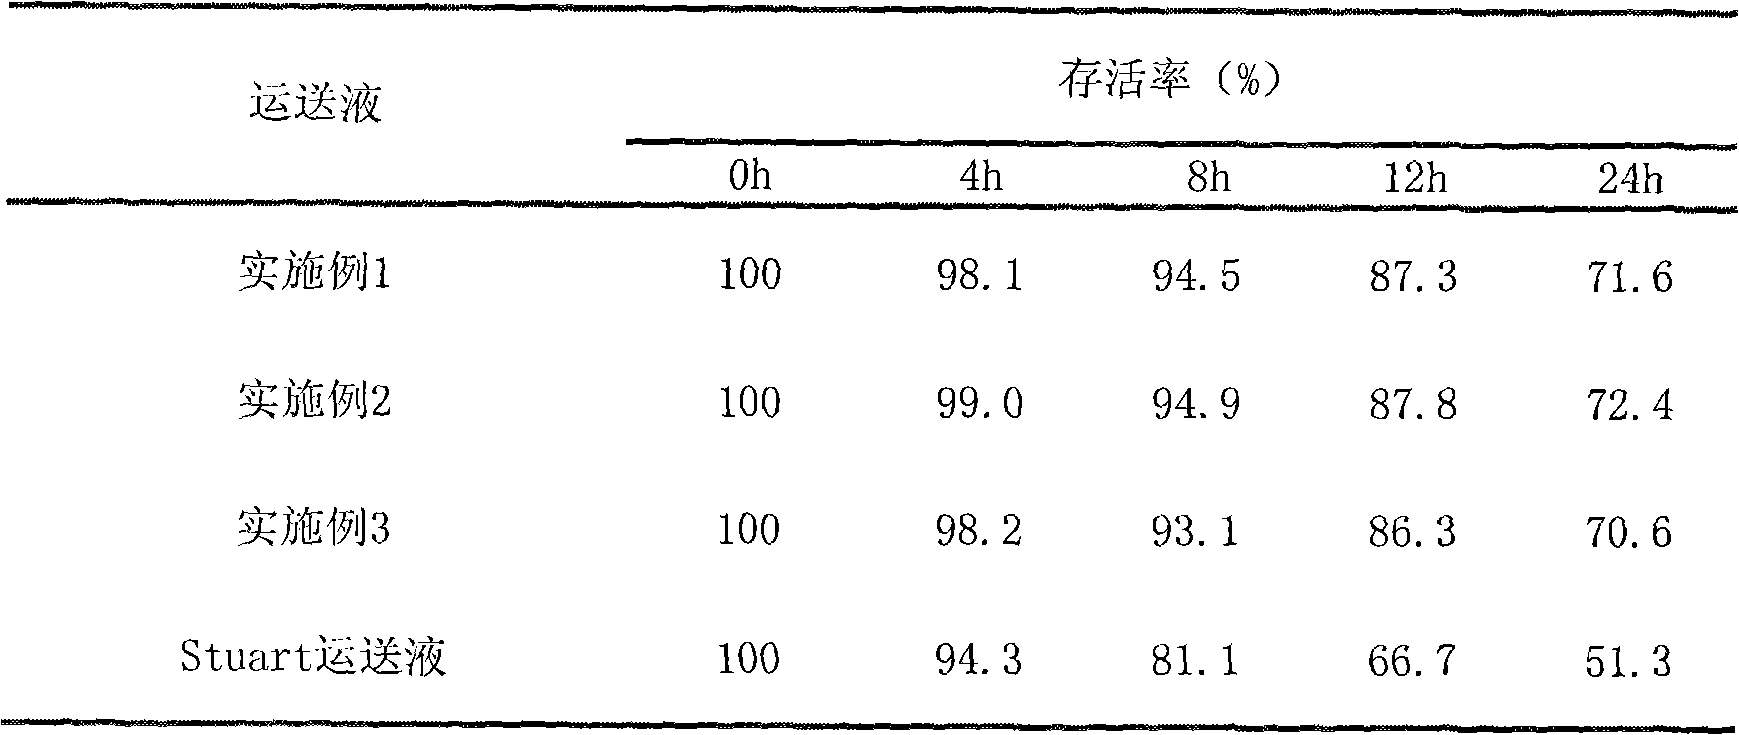 Transport fluid for culturing helicobacter pylori in gastric biopsy specimen and preparation method and application thereof